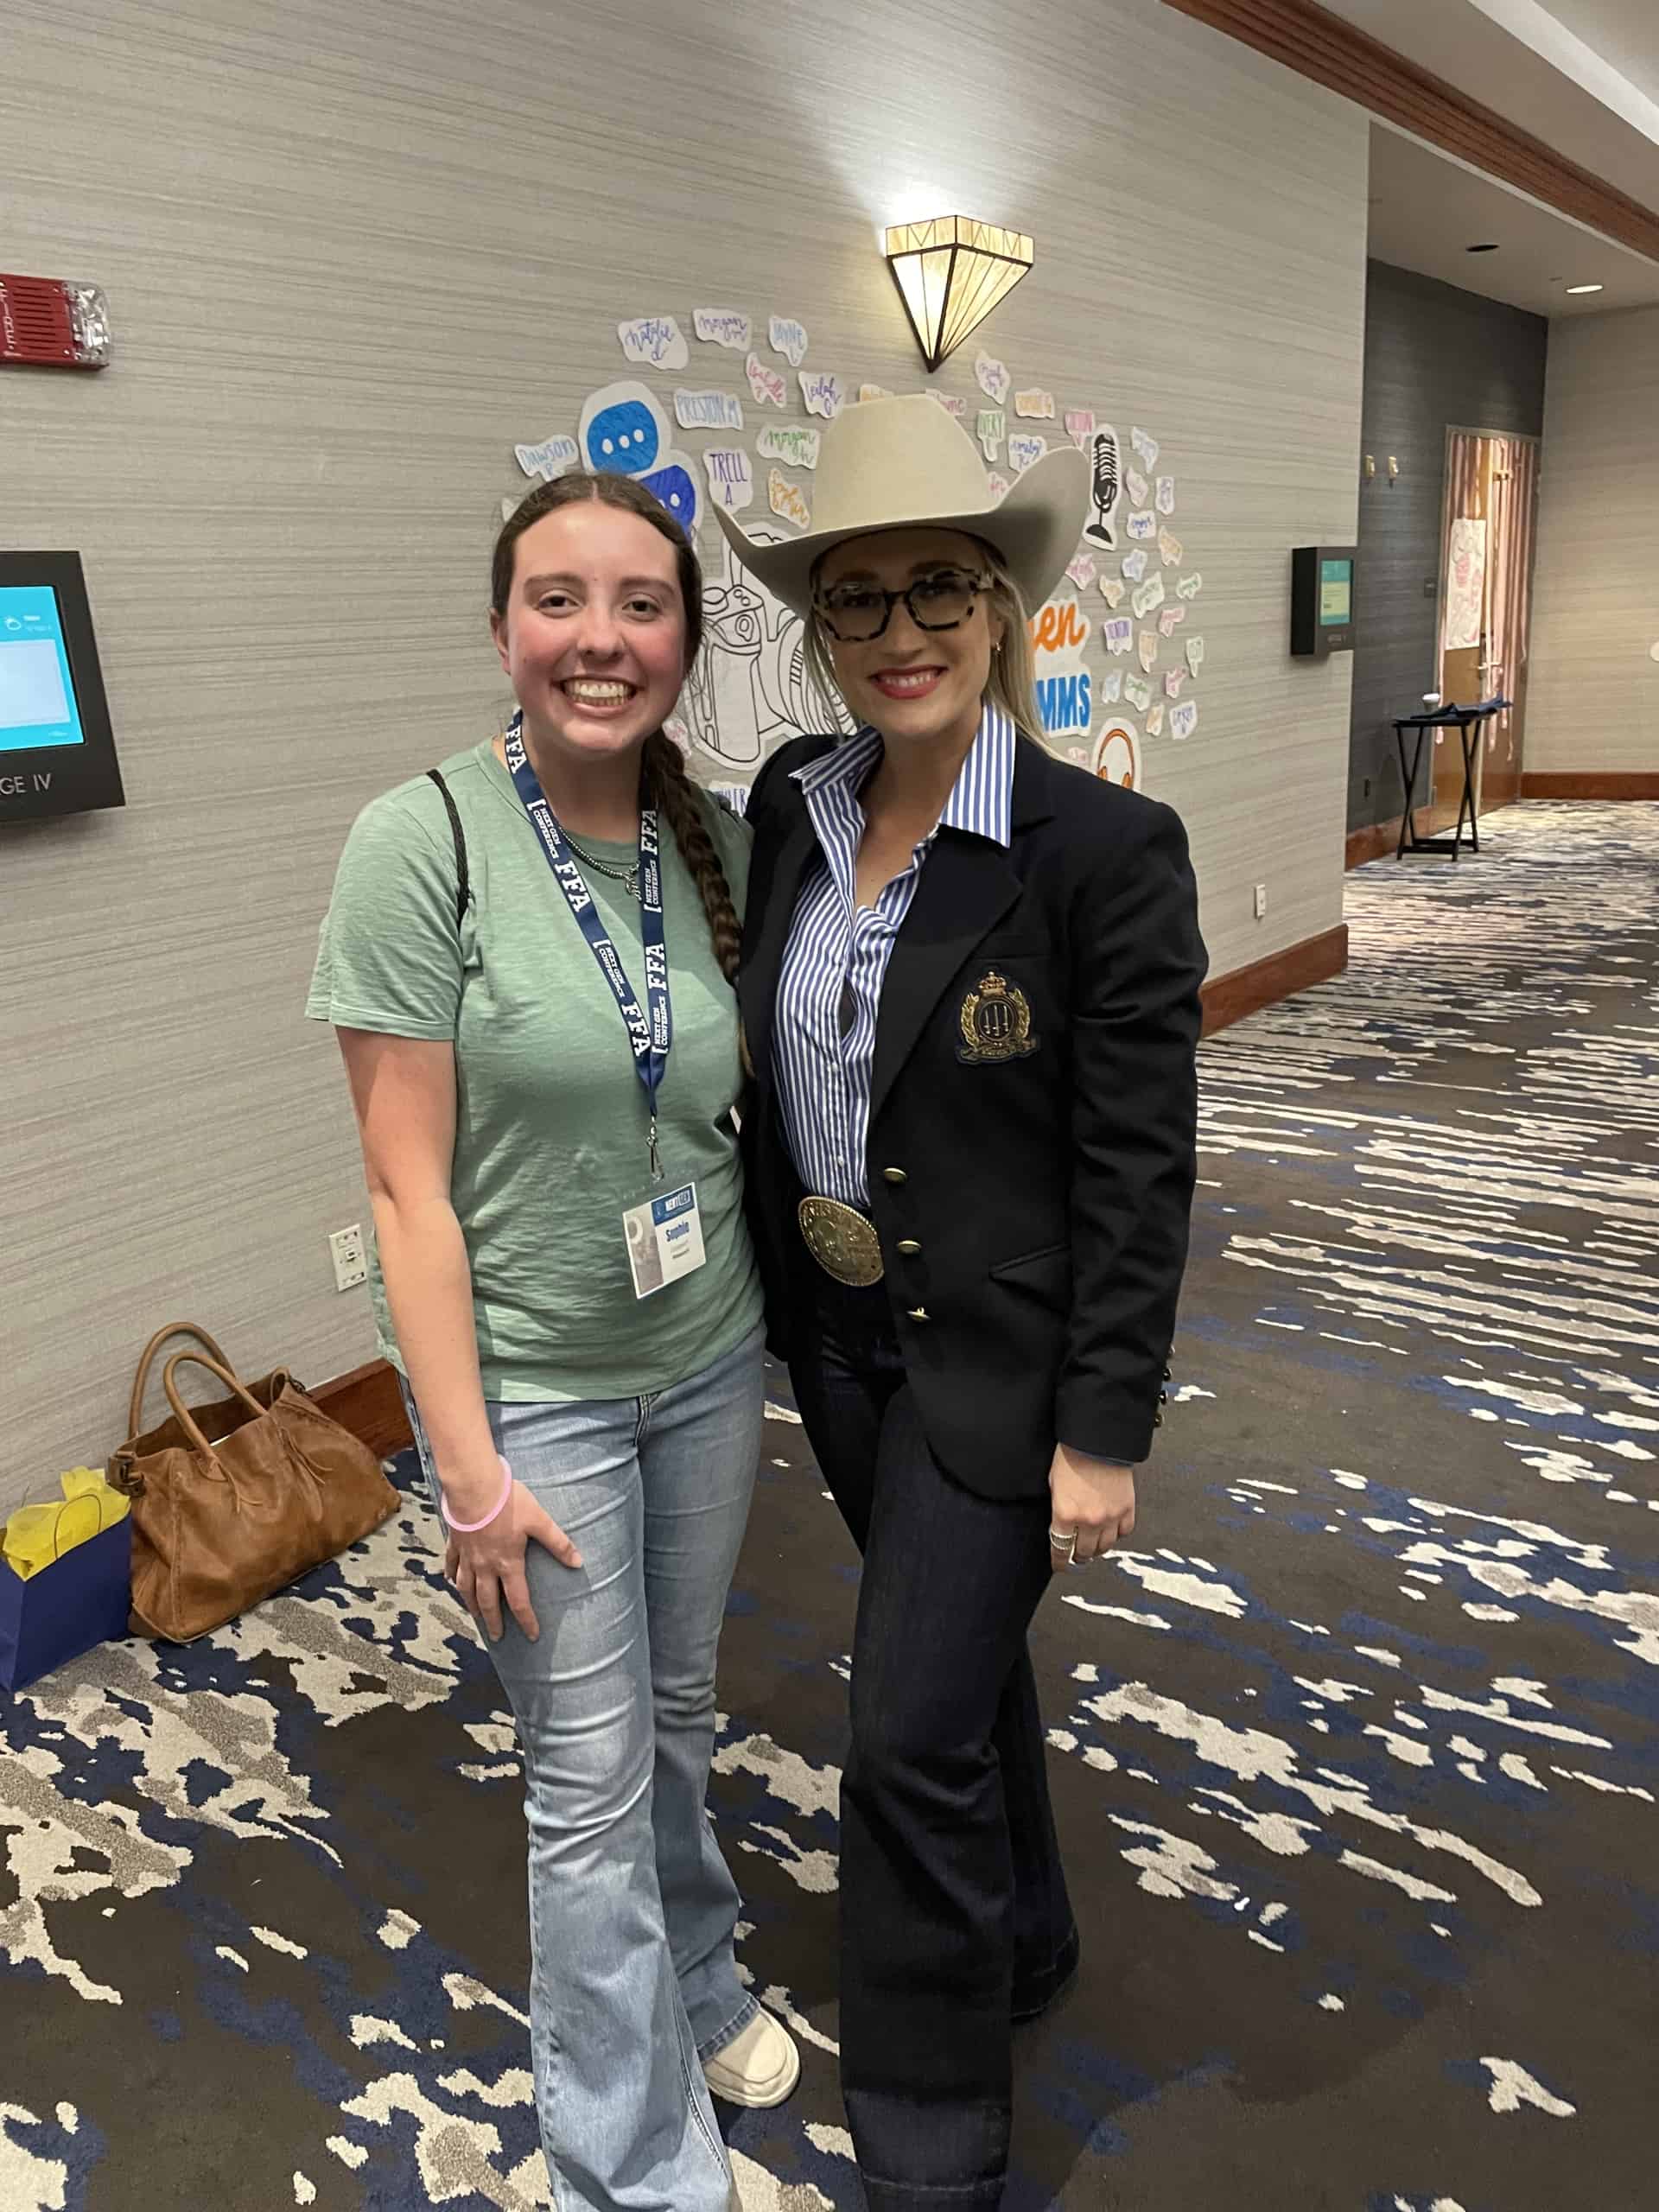 During this year's Next Gen Conference: Agricultural Communications, Sophie Geppert (left) met with former National FFA Convention keynote speaker Courtenay DeHoff.